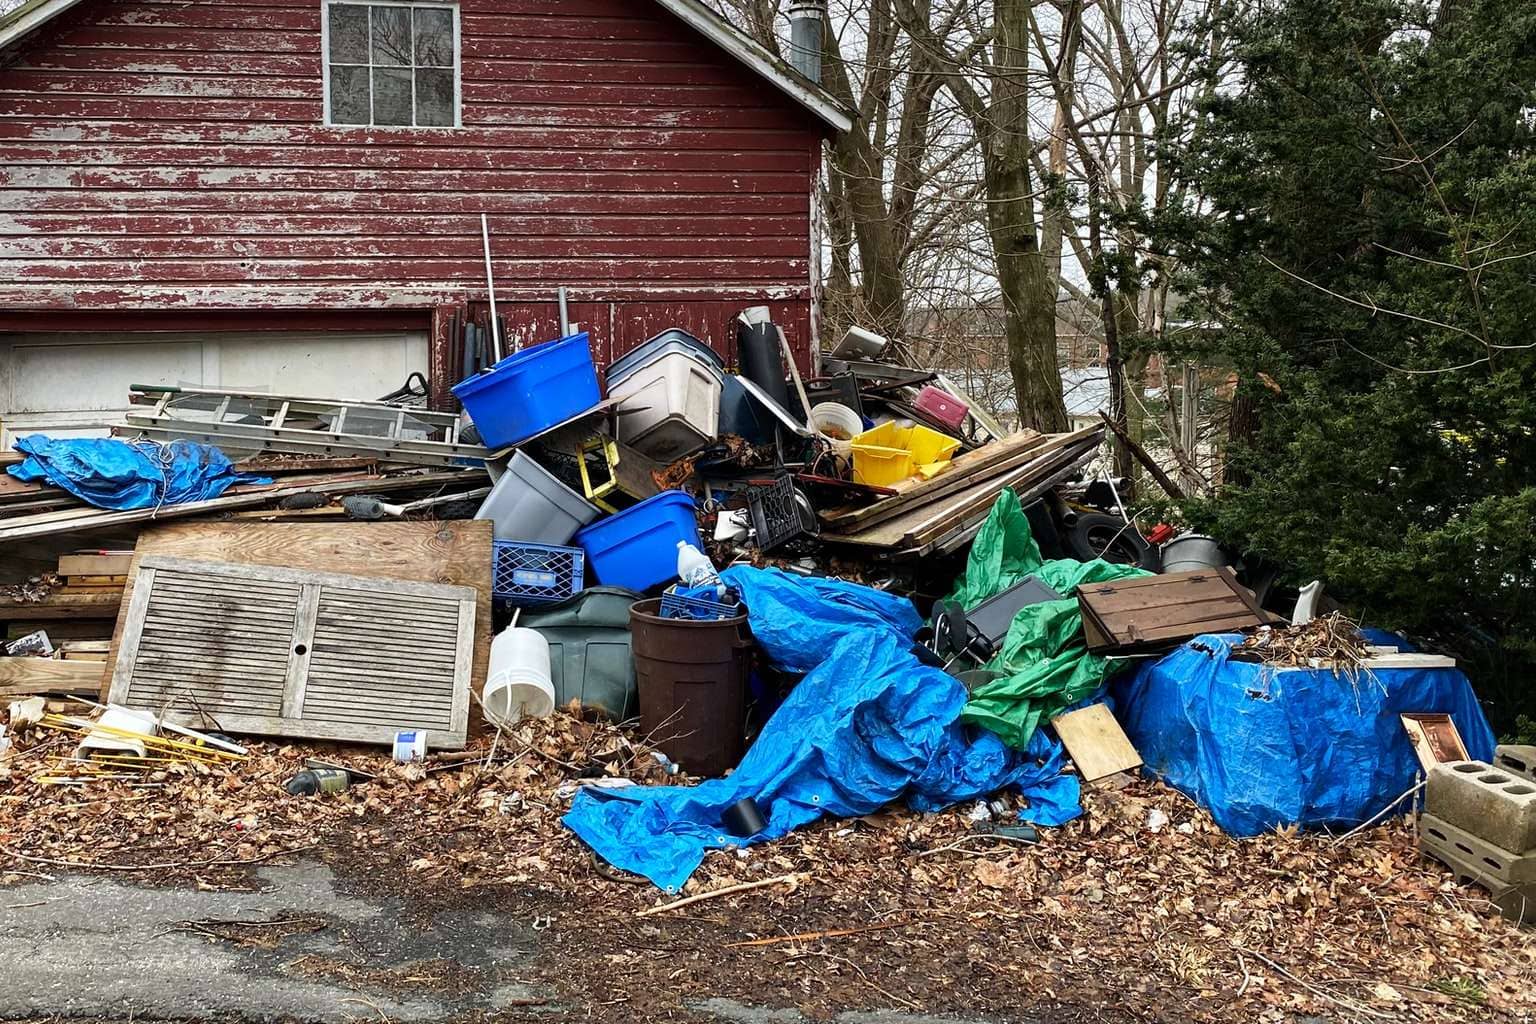 junk piled in front of house